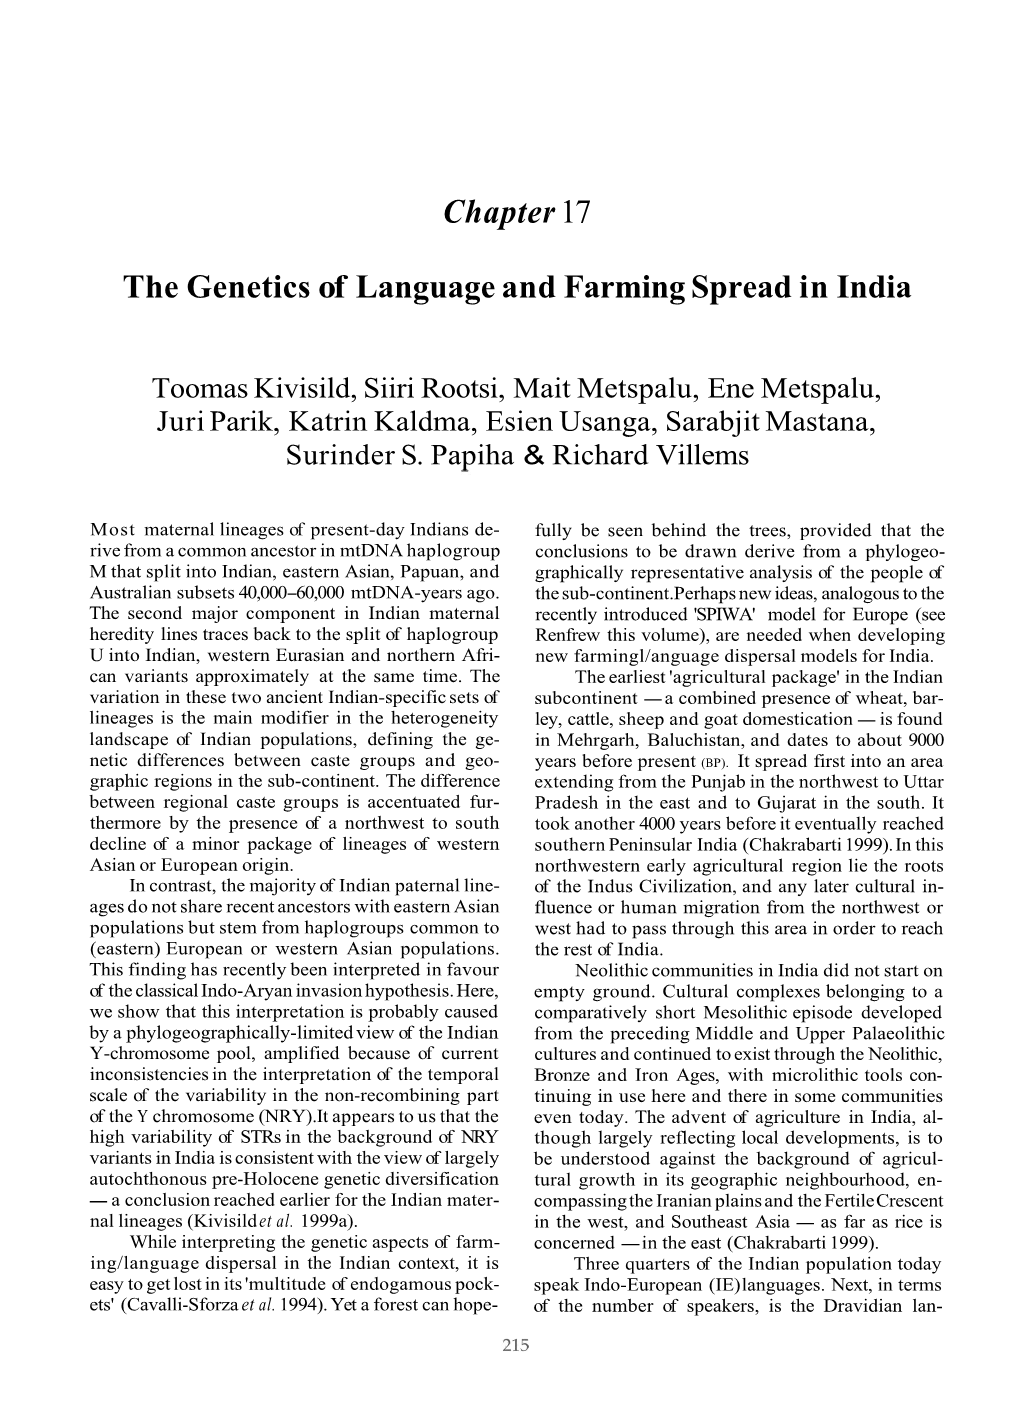 Kivisild 2003 the Genetics of Language and Farming Spread In